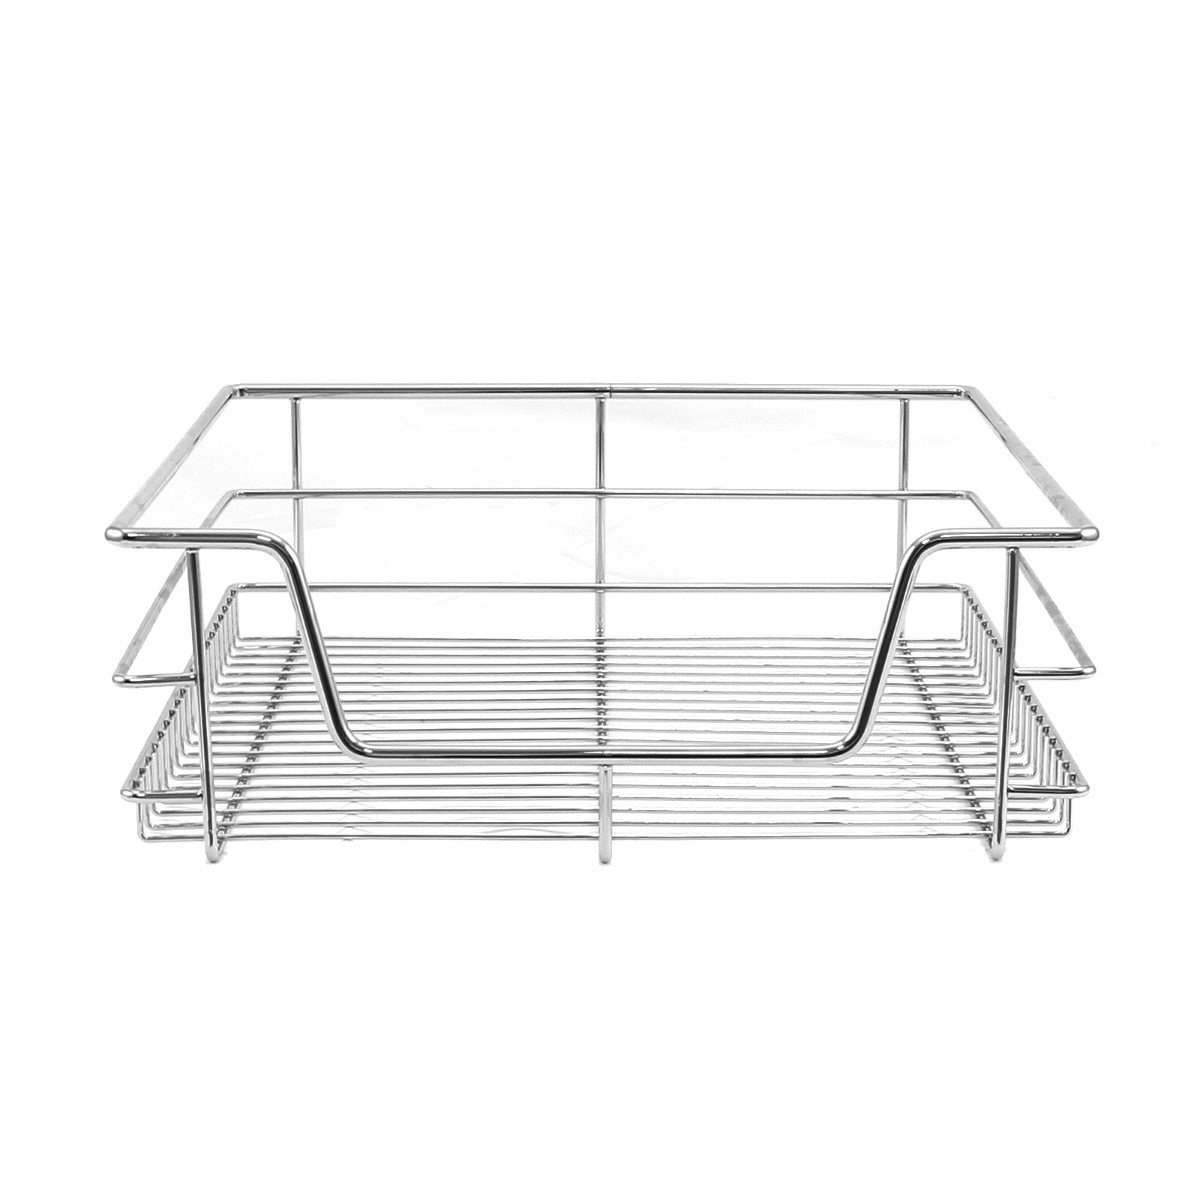 3 x KuKoo Kitchen Pull Out Storage Baskets – 500mm Wide Cabinet